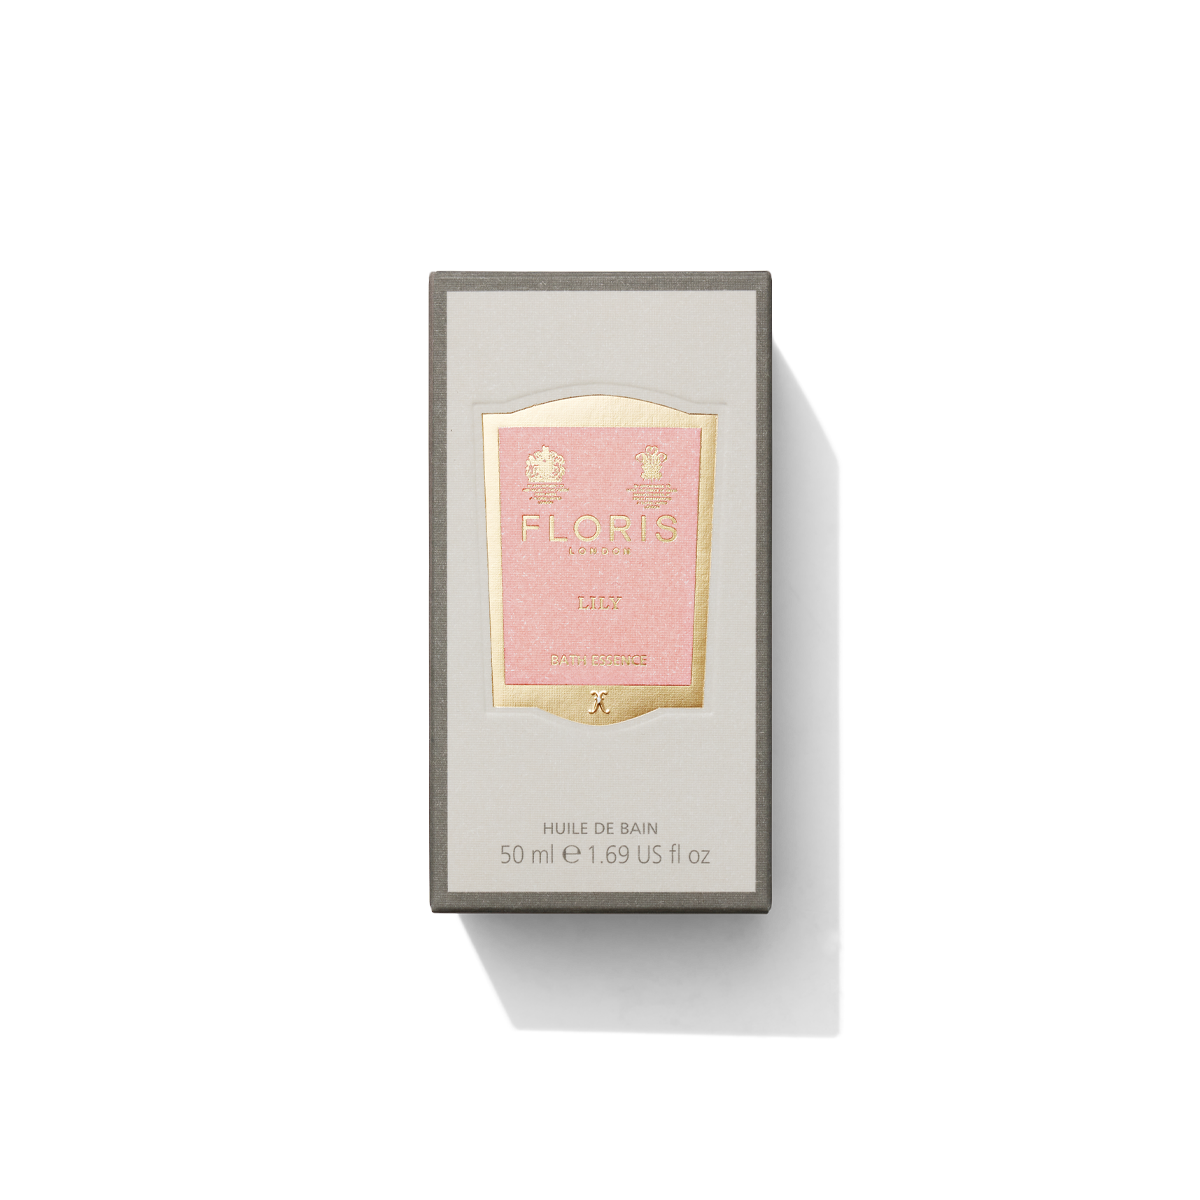 Lily 50ml Box white with pink label